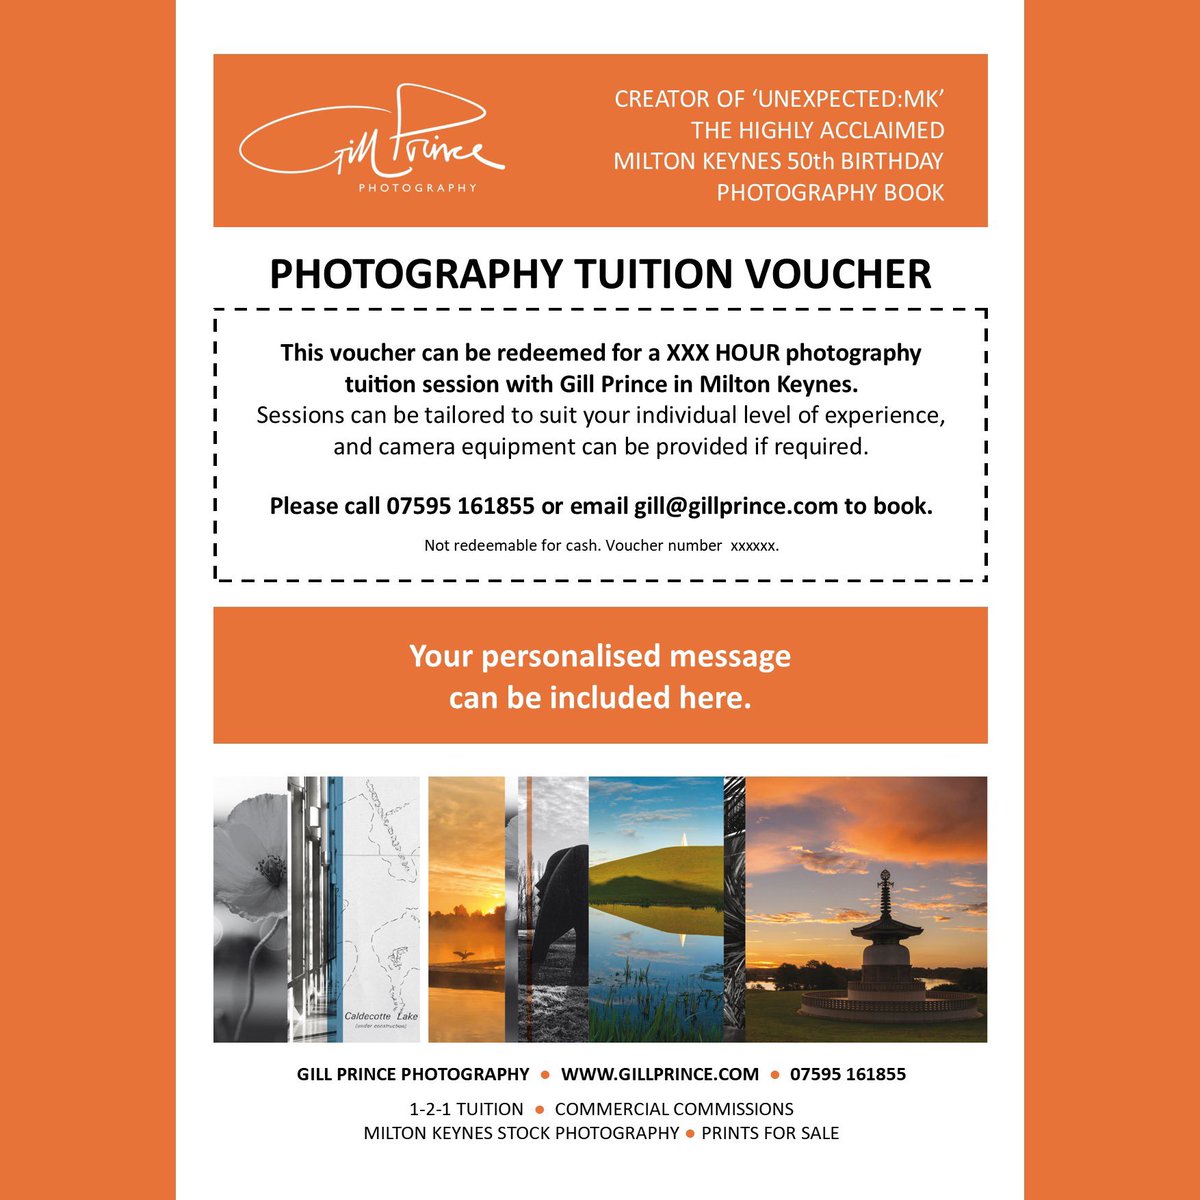 Just a quick reminder about my photography tuition vouchers - if you’re looking for a present for anyone who loves taking photos and would like to learn more! Can be used to learn Lightroom also - either in person or via Zoom 😊 More info at gillprince.com/photography-tu…. Thank you.